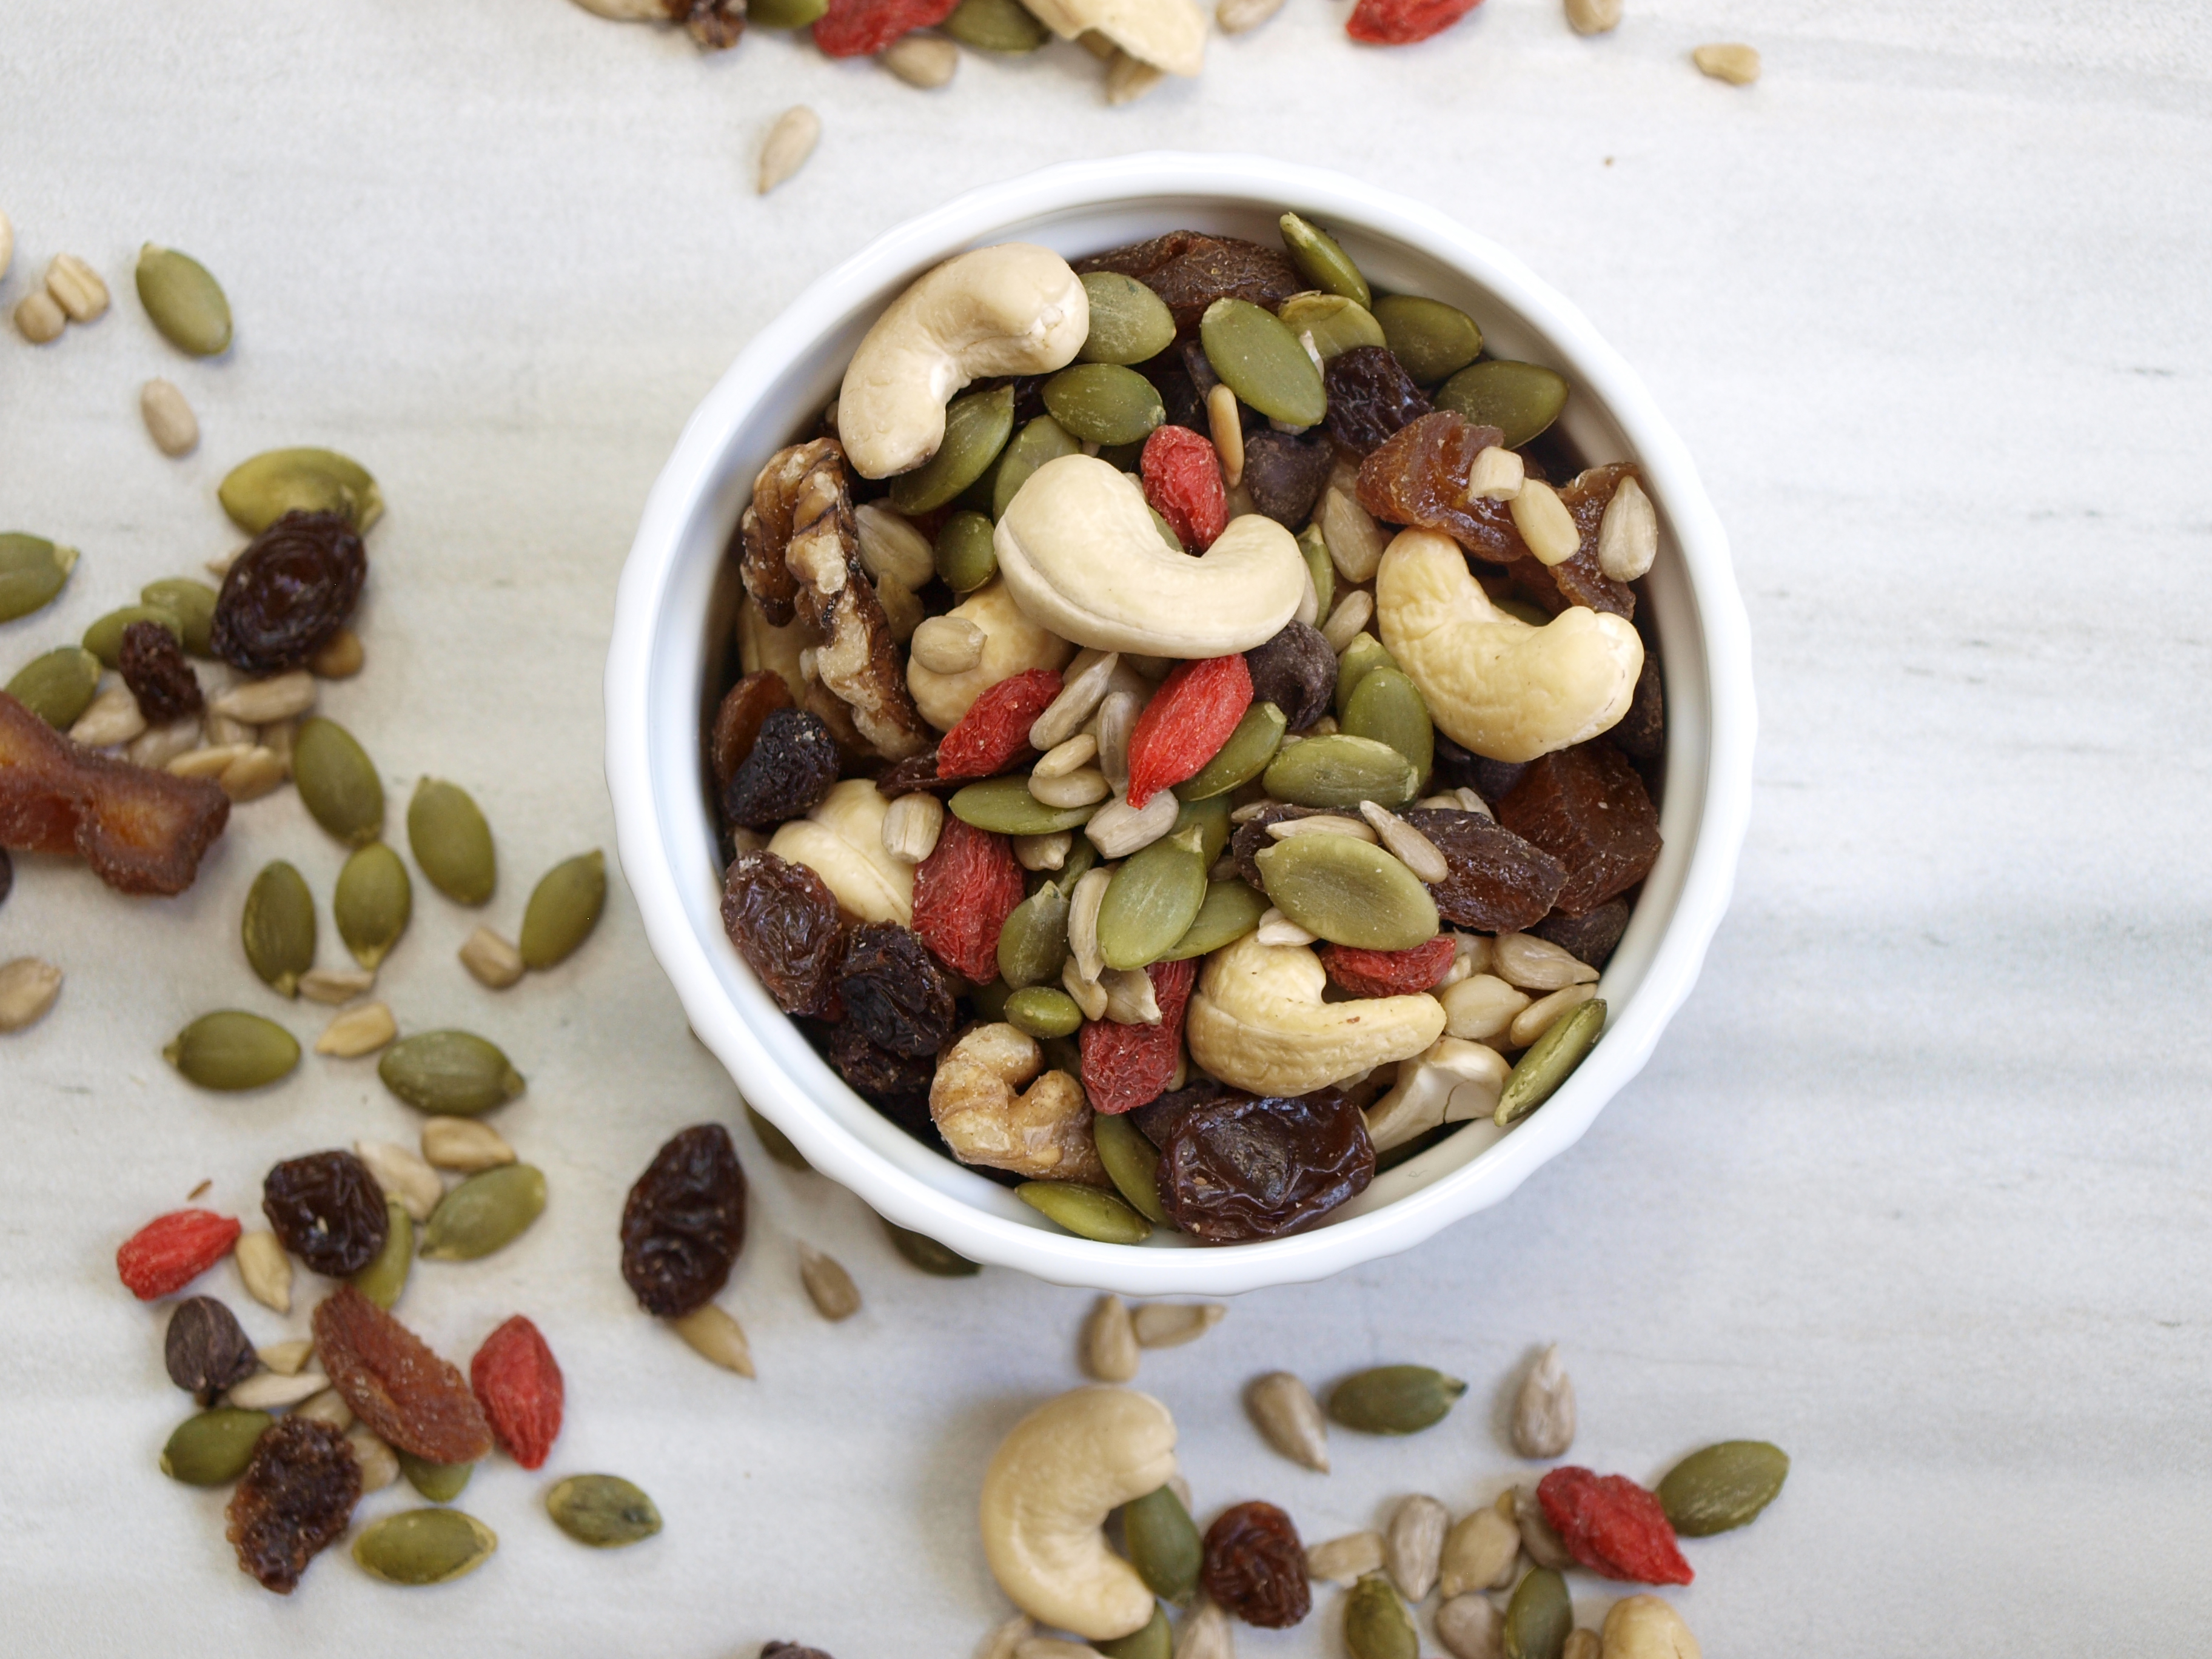 Easy Trail Mix: Eating Healthy on the Go